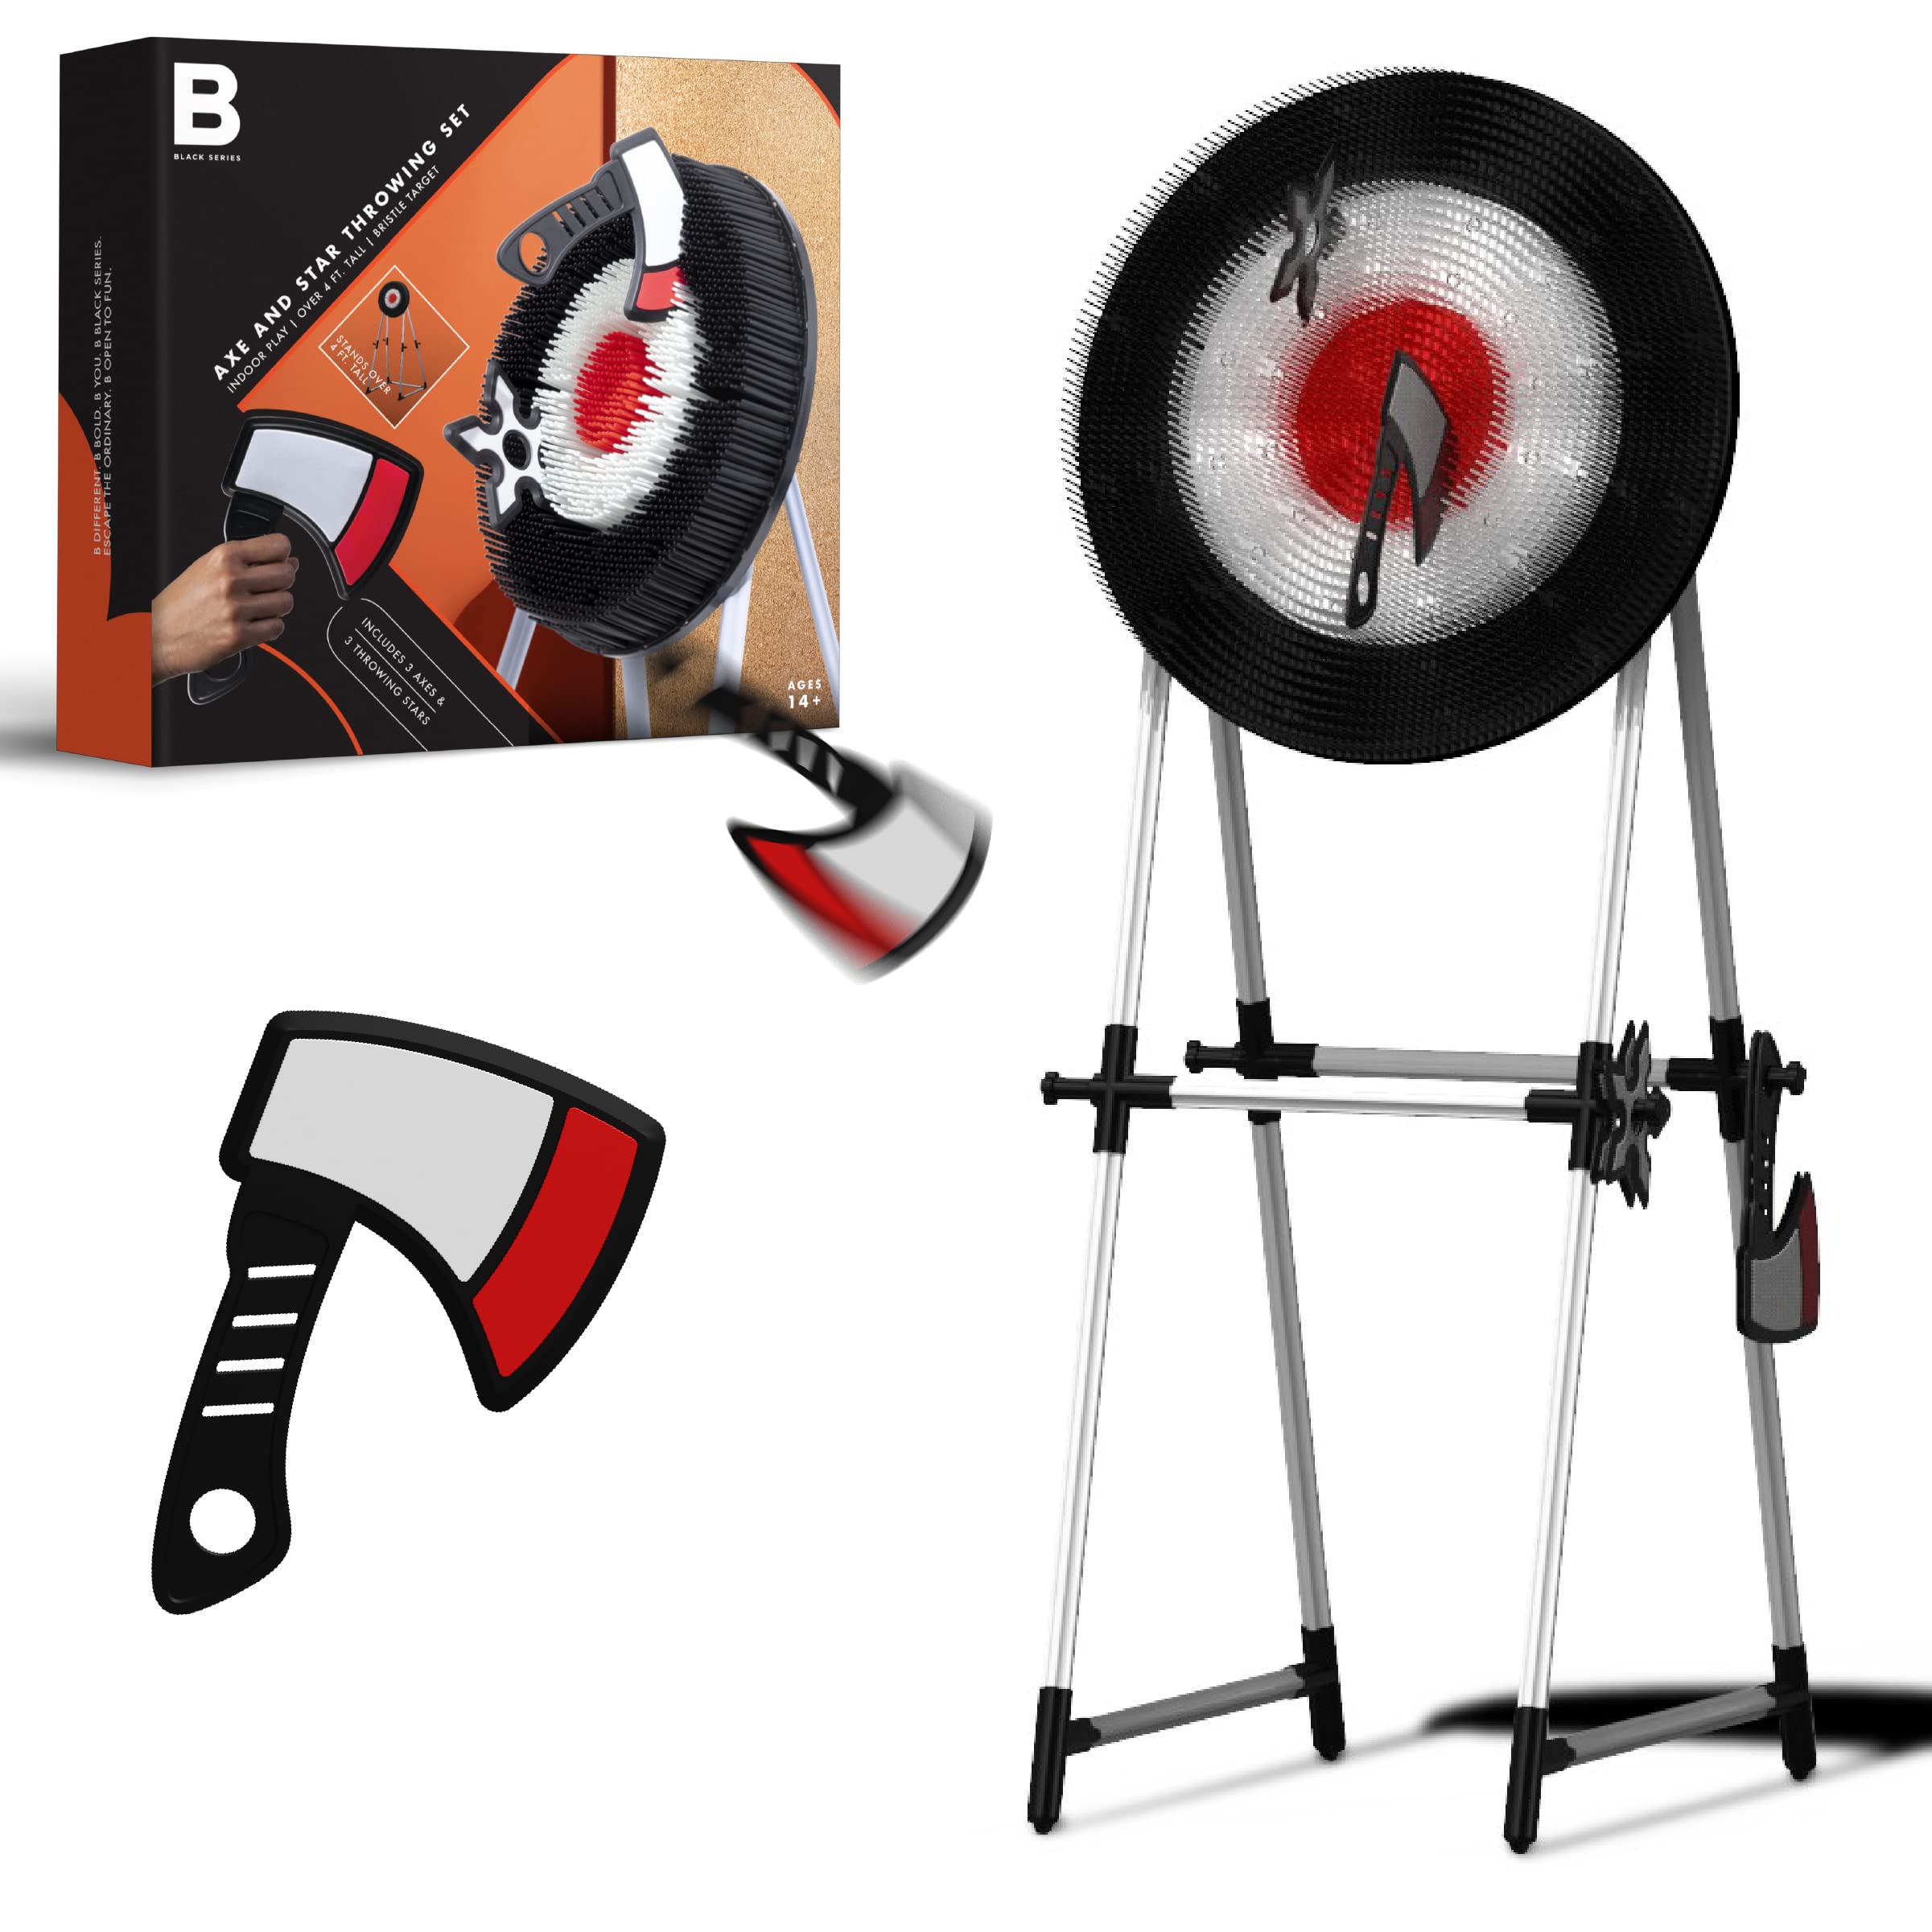 The Black Series Axe & Star Throwing Target Set $35 + Free Shipping w/ Prime or on $35+